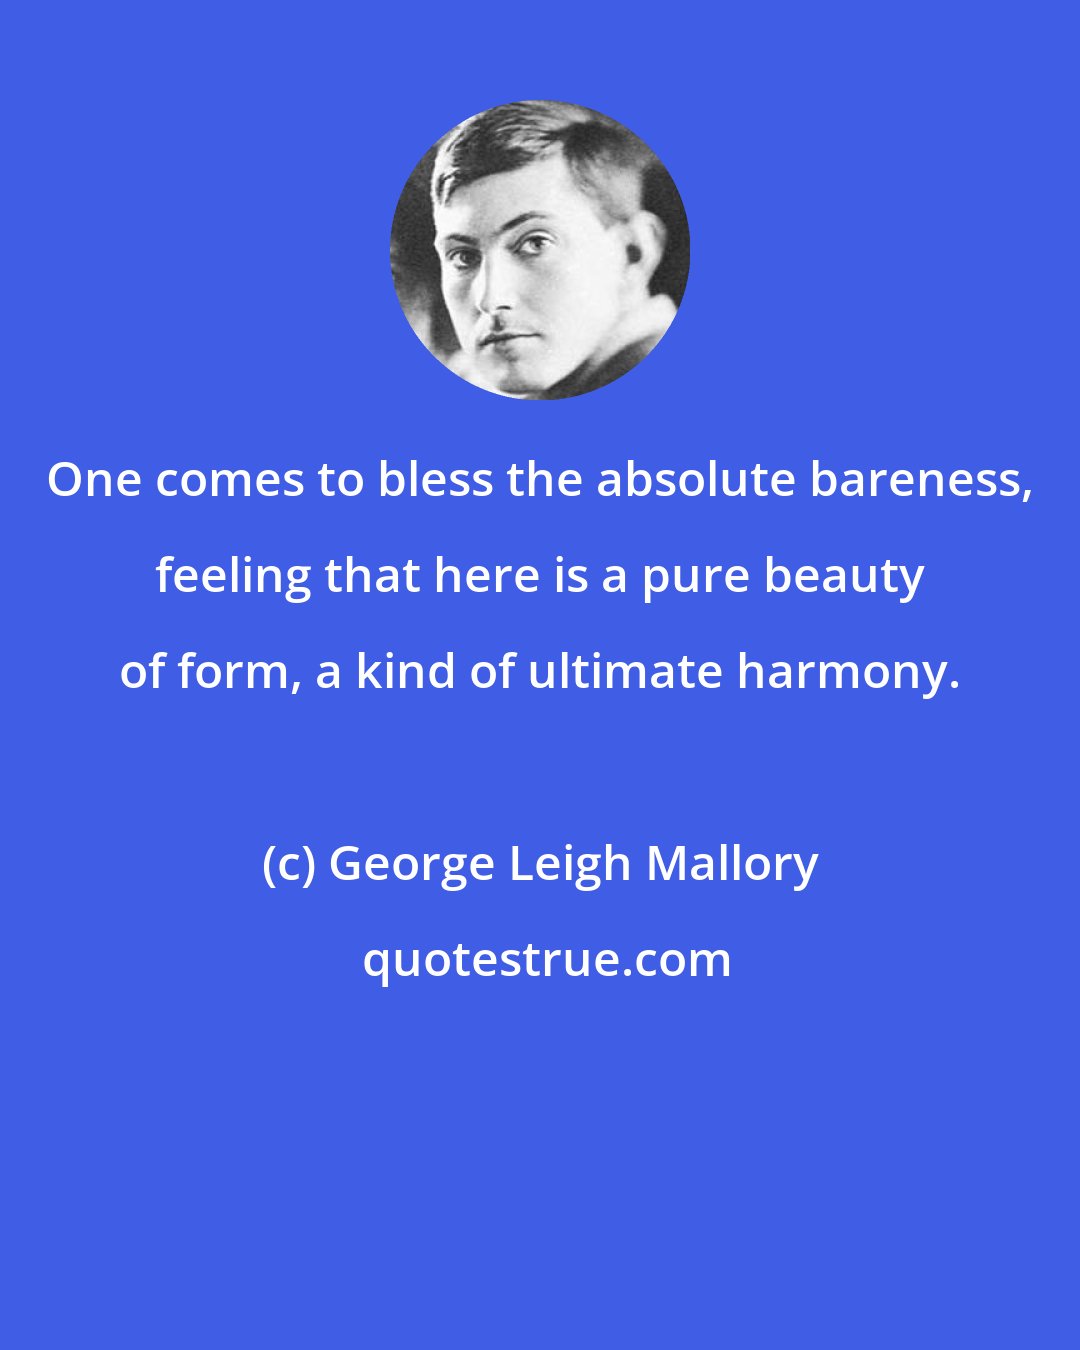 George Leigh Mallory: One comes to bless the absolute bareness, feeling that here is a pure beauty of form, a kind of ultimate harmony.